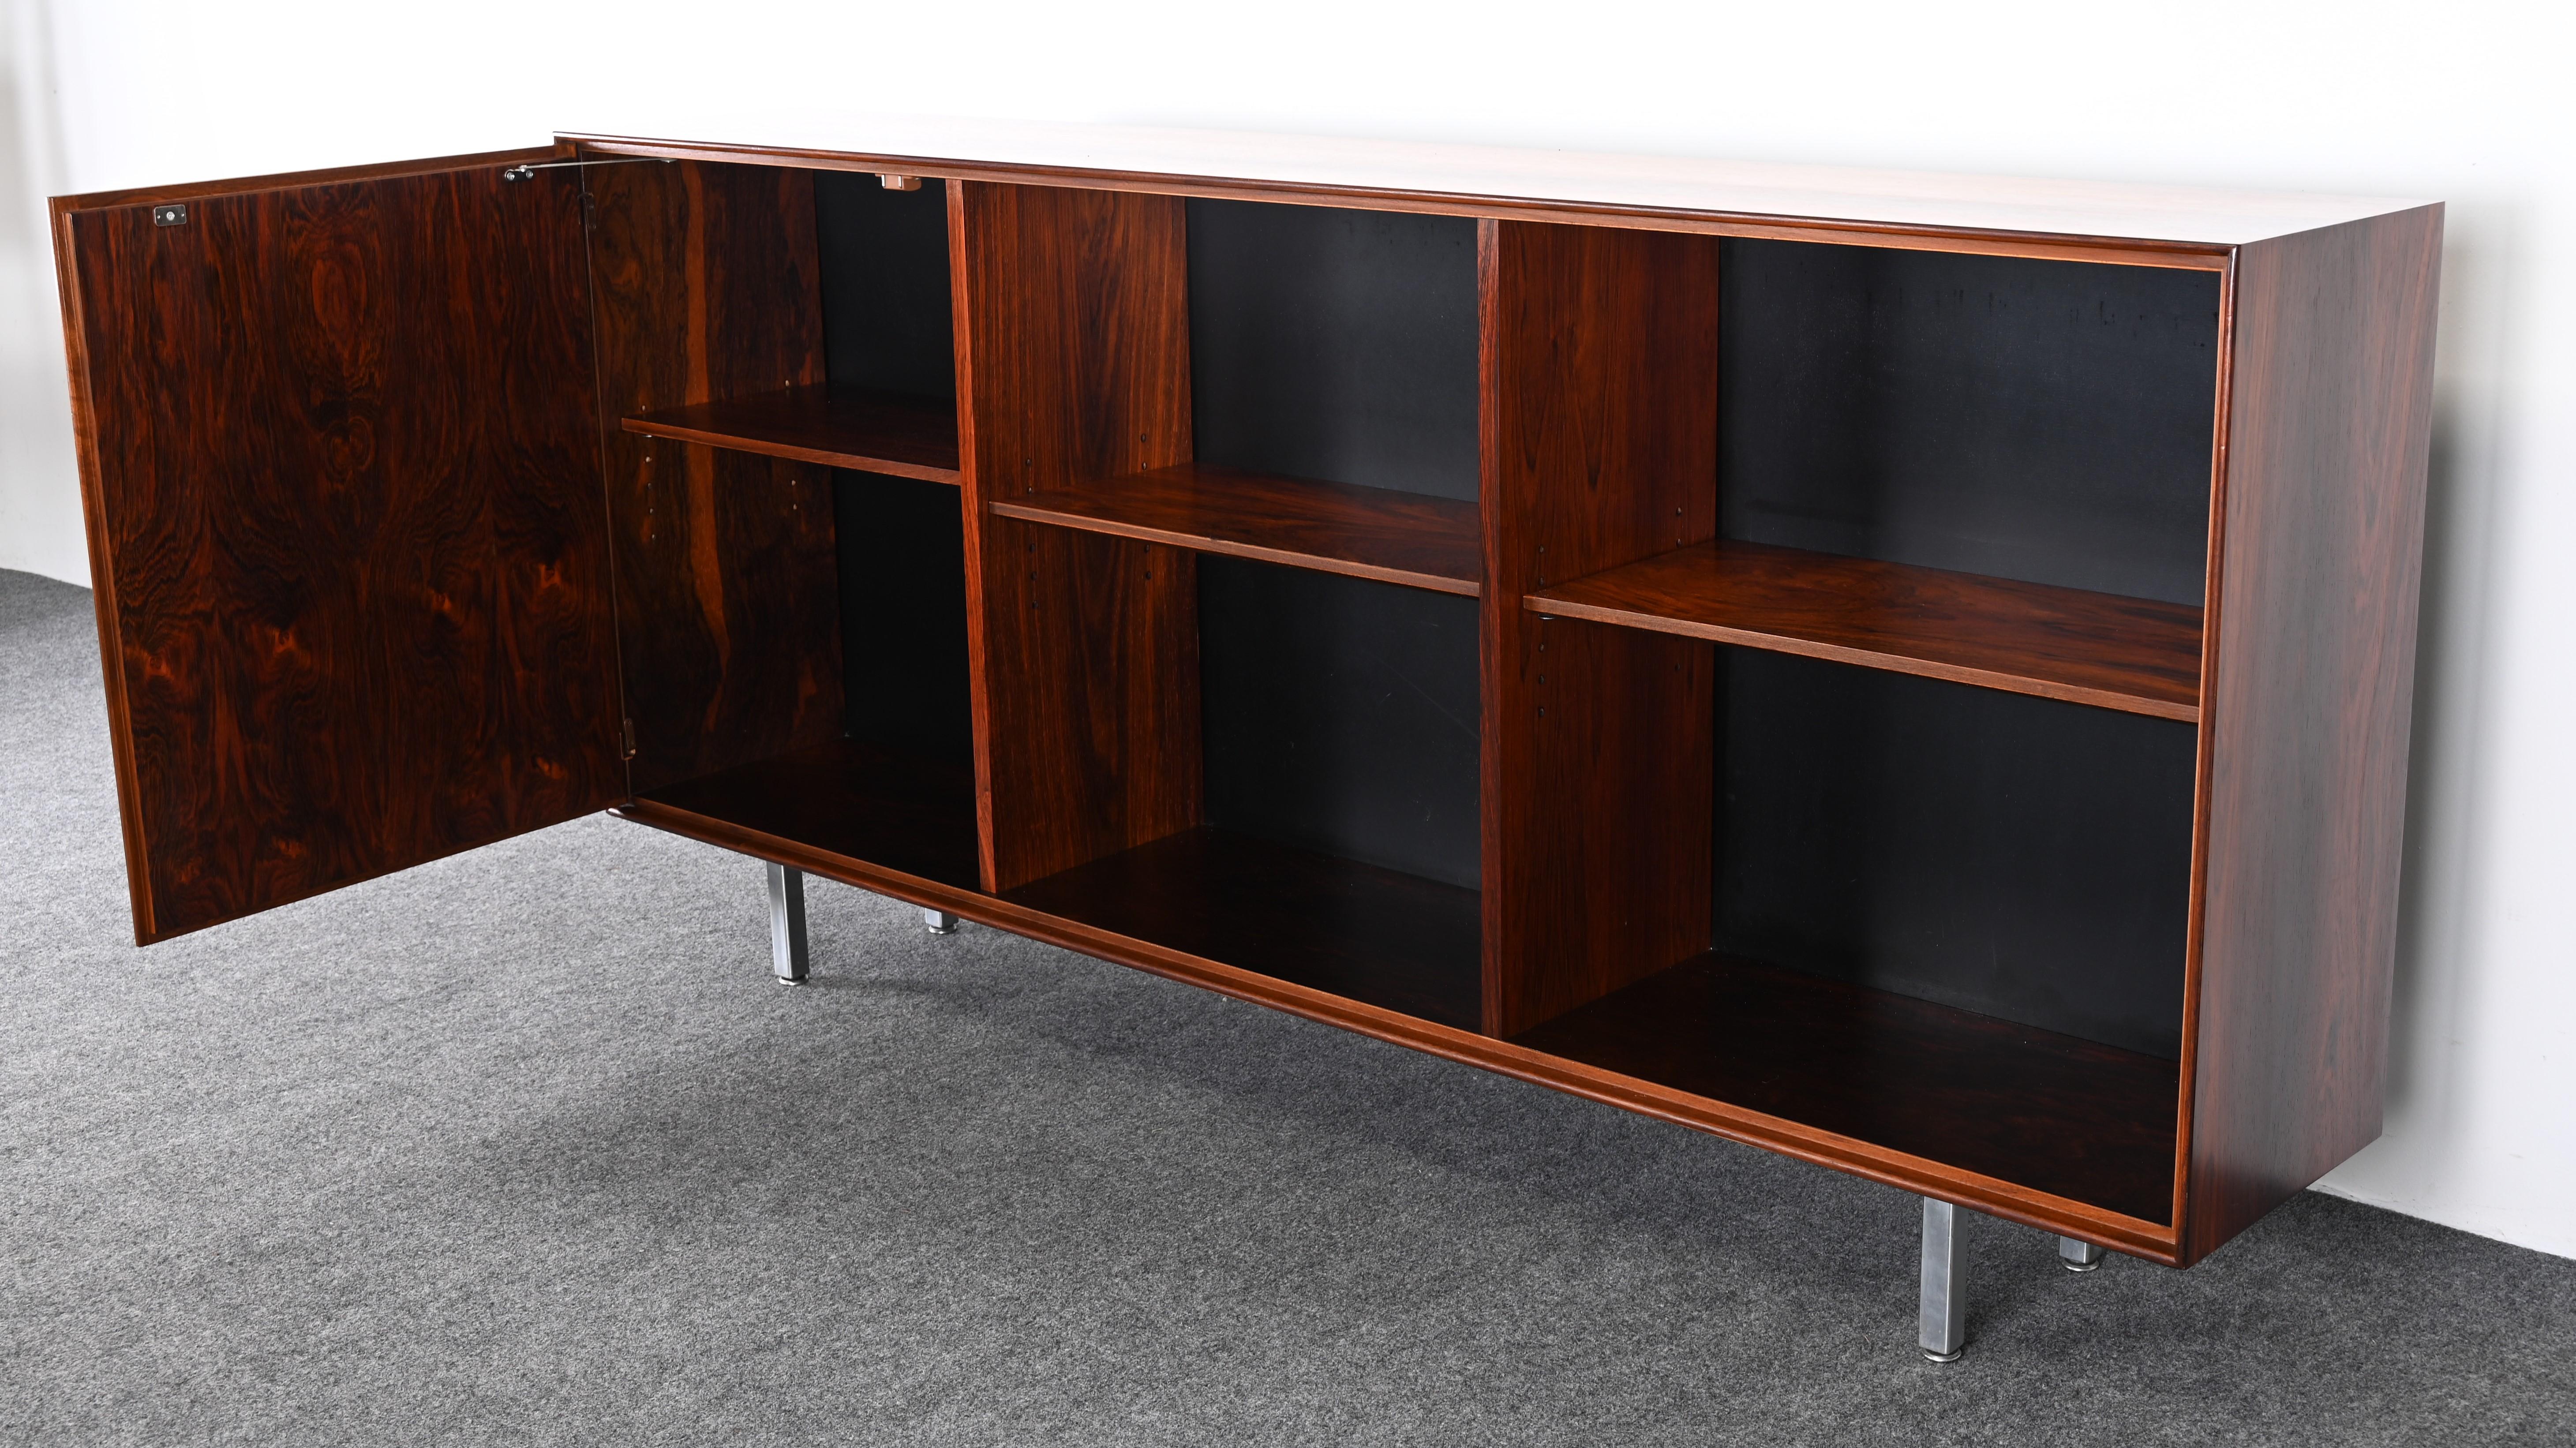 Rosewood Thin Edge Bookshelf by George Nelson for Herman Miller, 1950s For Sale 6